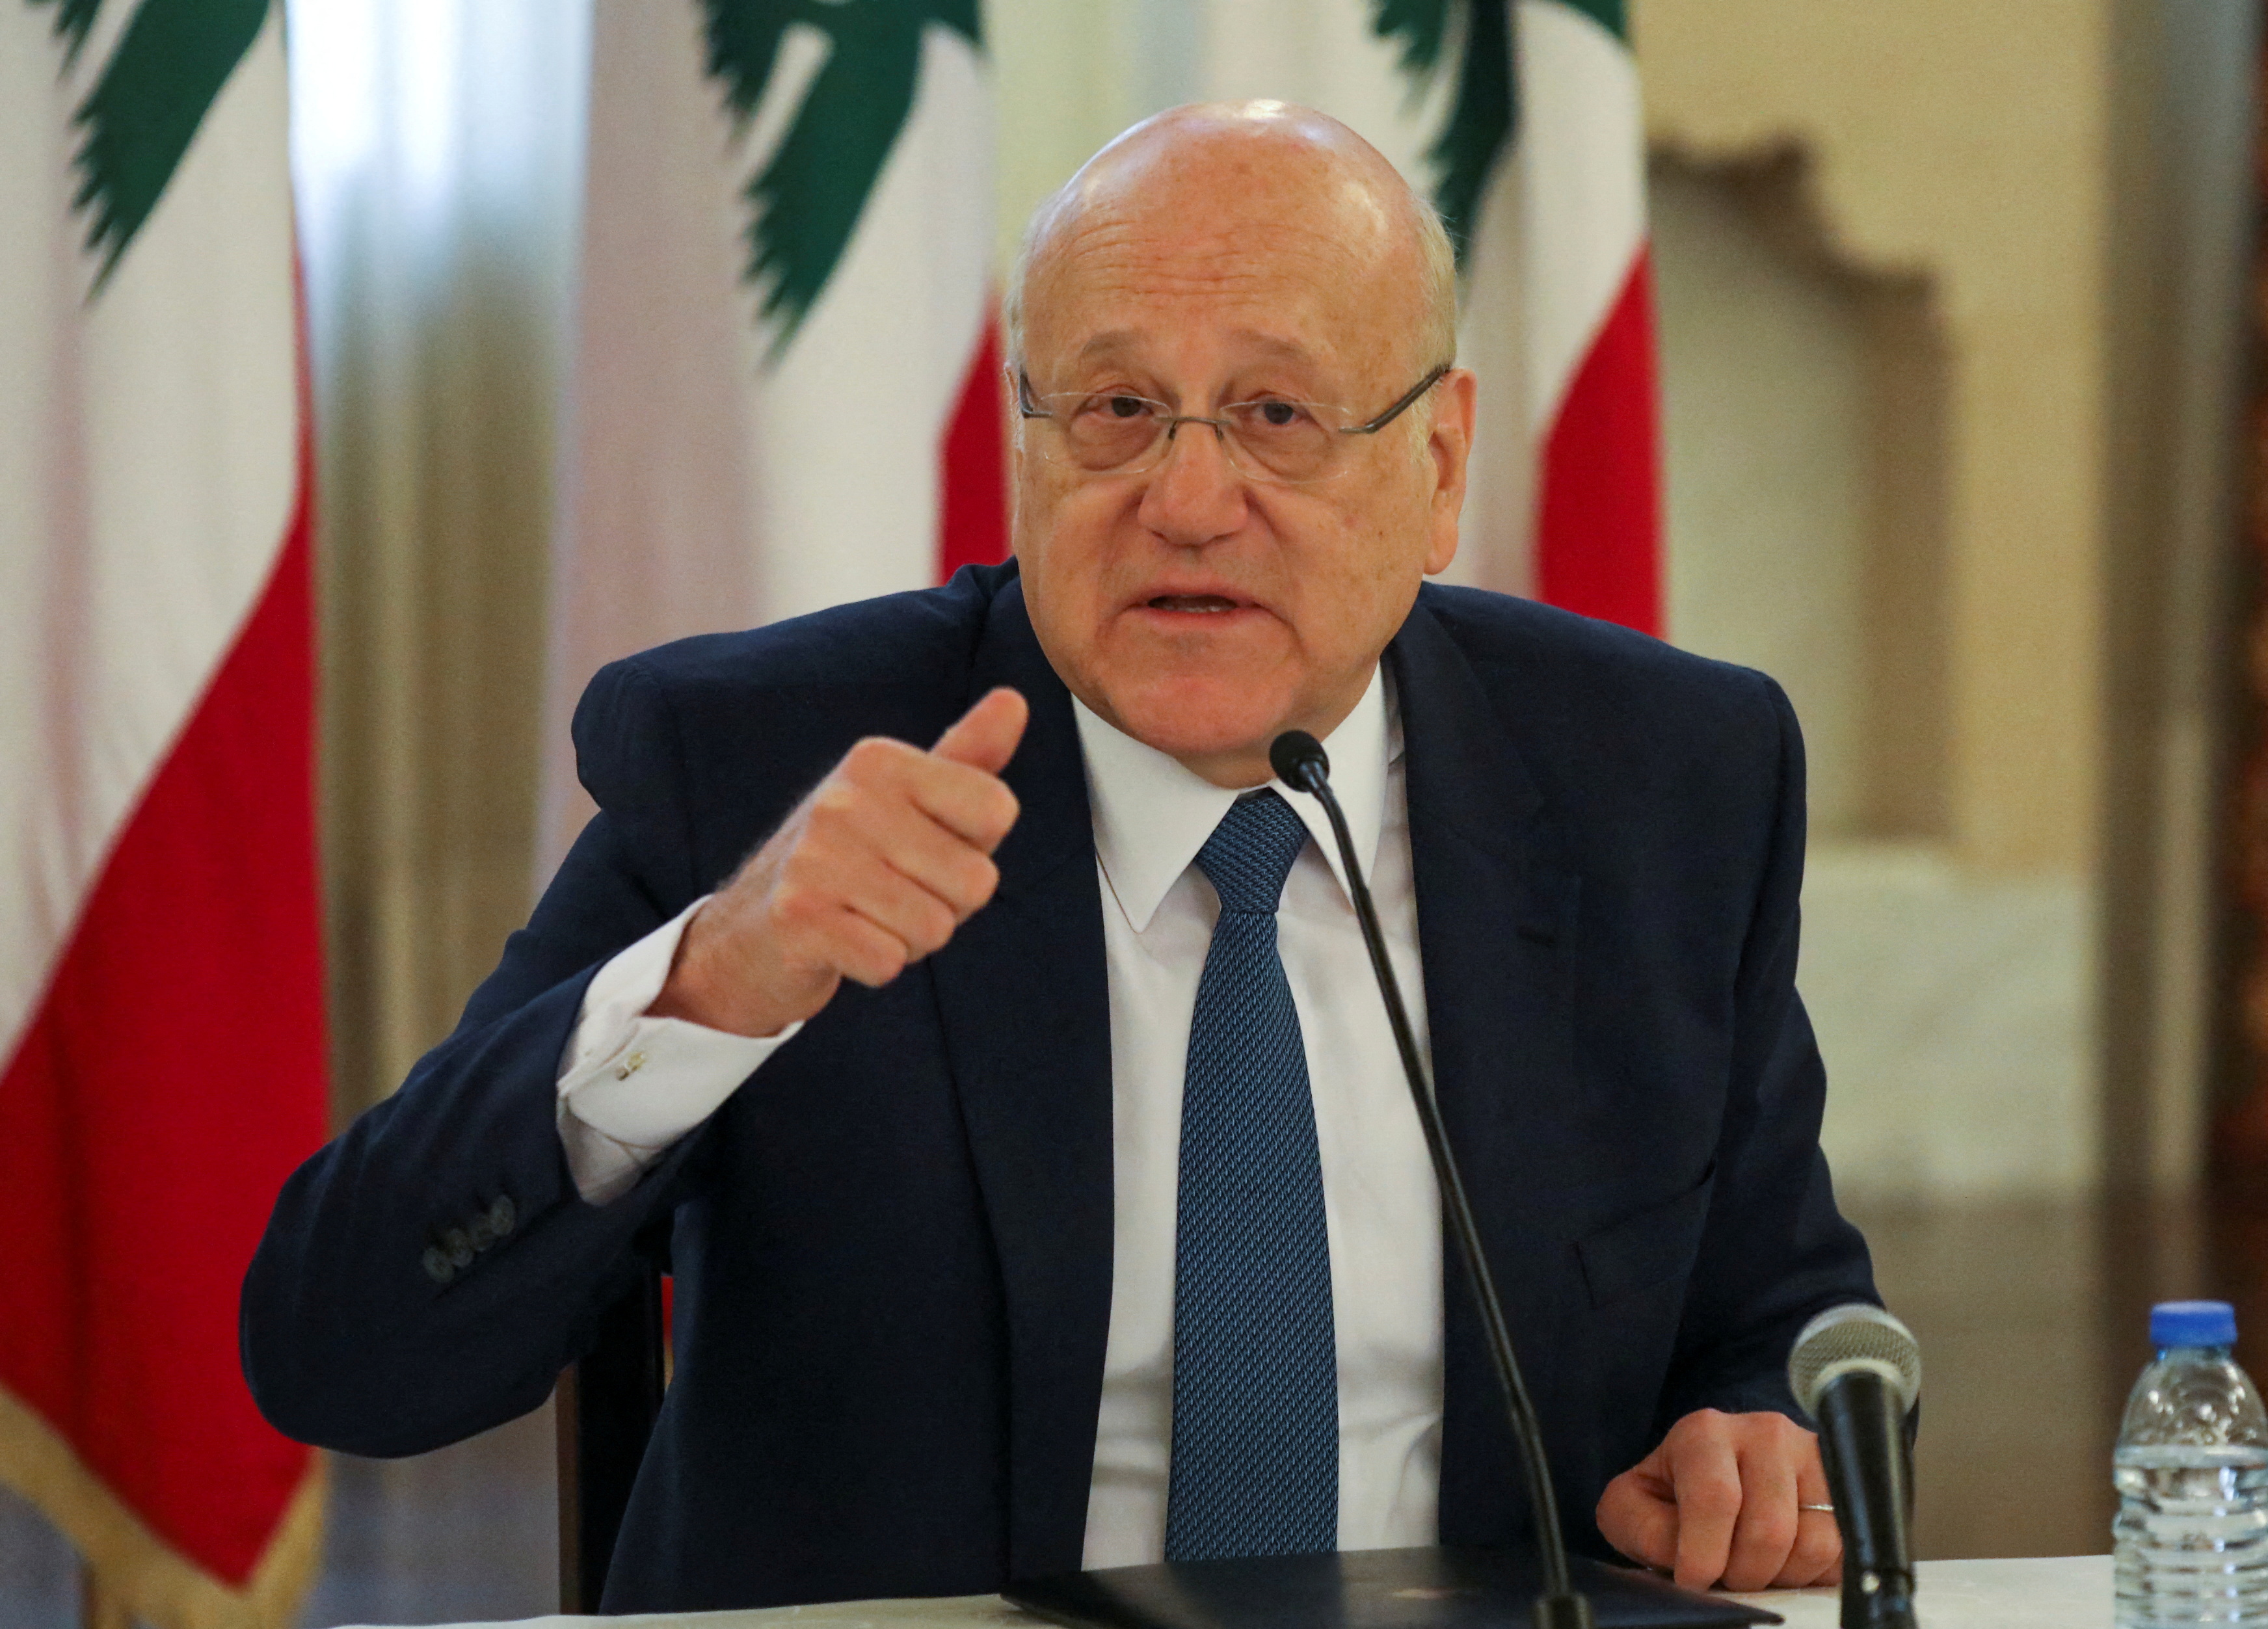 Lebanese Prime Minister Najib Mikati gestures during a news conference on the latest developments in the country at the government palace in Beirut